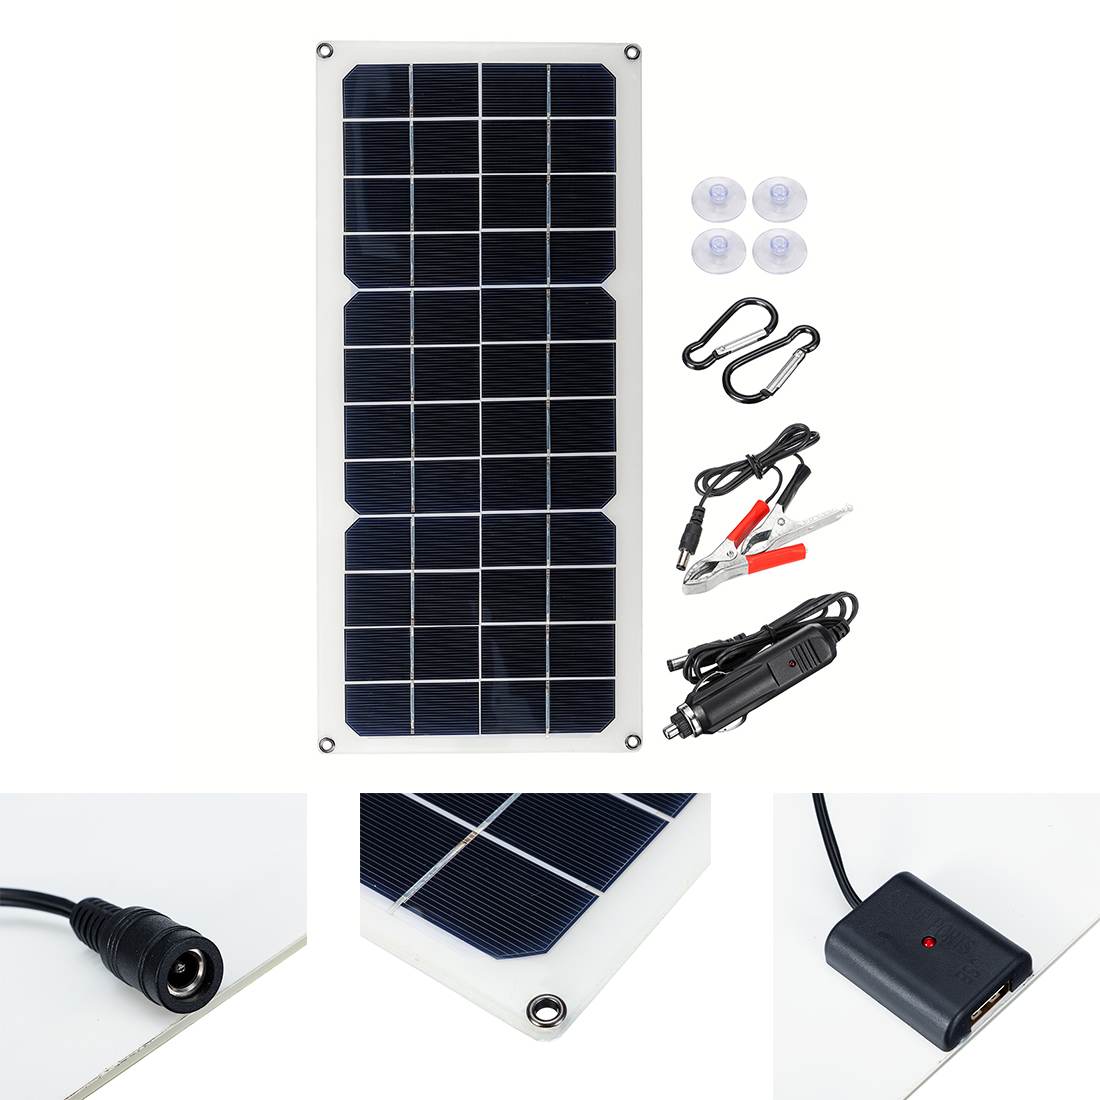 30W-Solar-Panel-12V-Polycrystalline-USB-Power-Portable-Outdoor-Cycle-Camping-Hiking-Travel-Solar-Cel-1934118-7